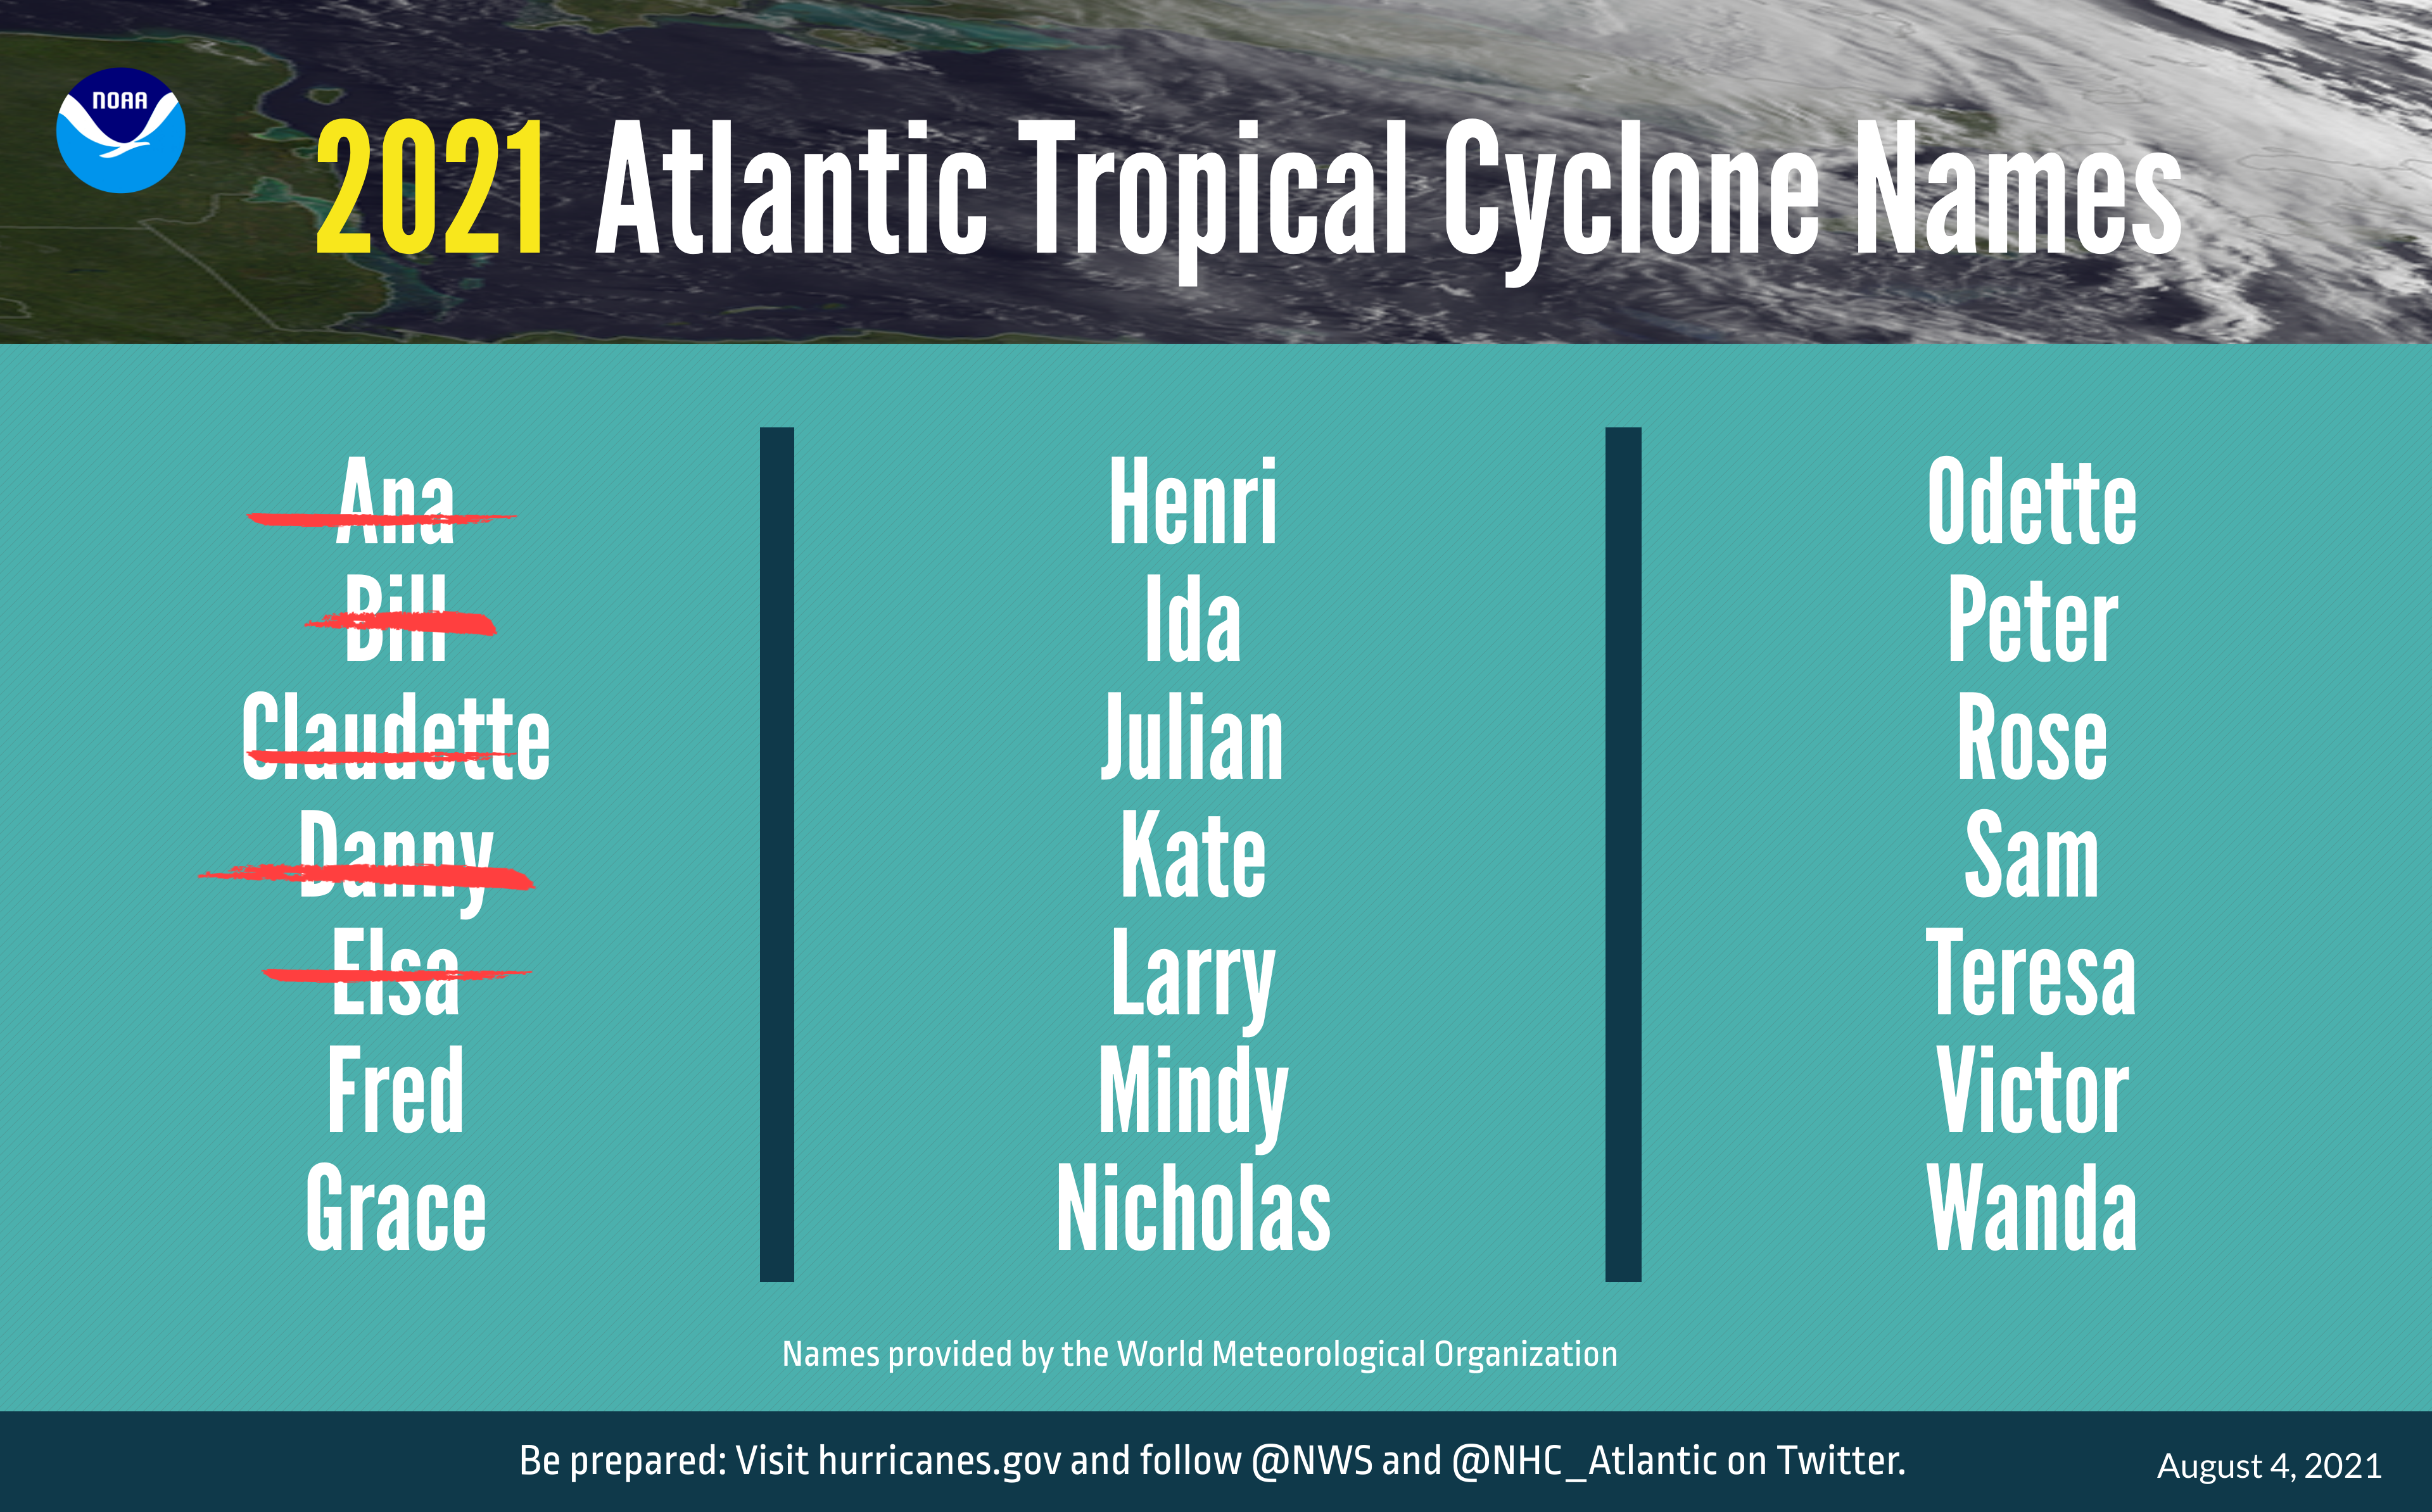 The 2021 Atlantic tropical cyclone names selected by the World Meteorological Organization. 